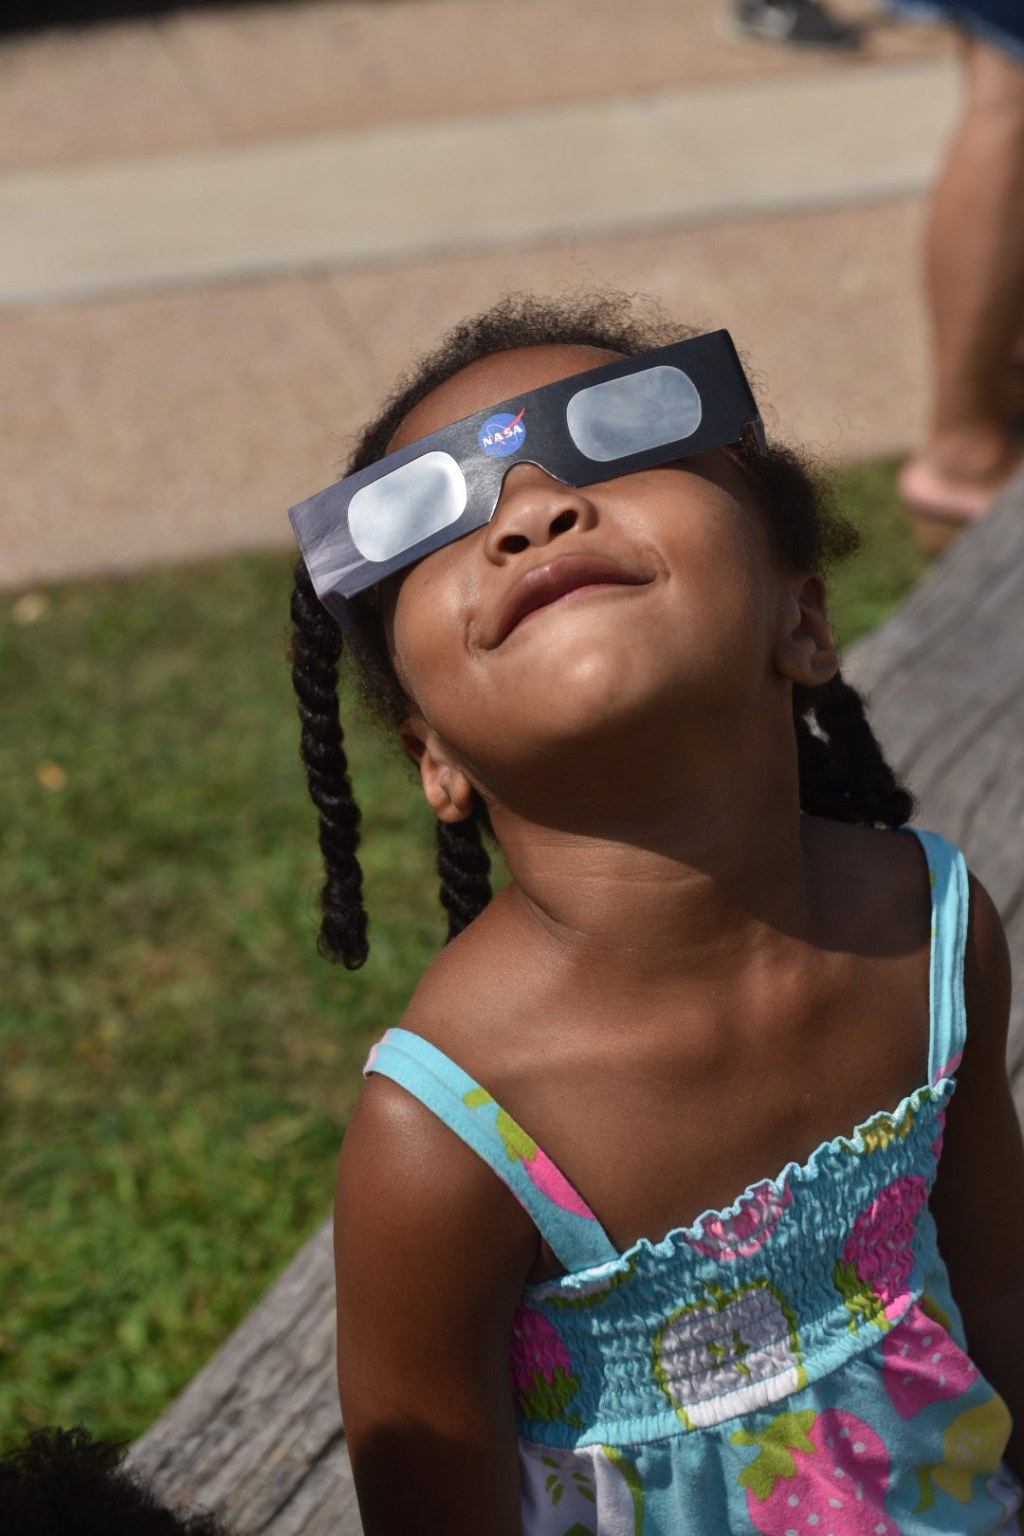 A young eclipse viewer experiences the Aug. 21, 2017 total solar eclipse in Cleveland, Ohio using protective glasses